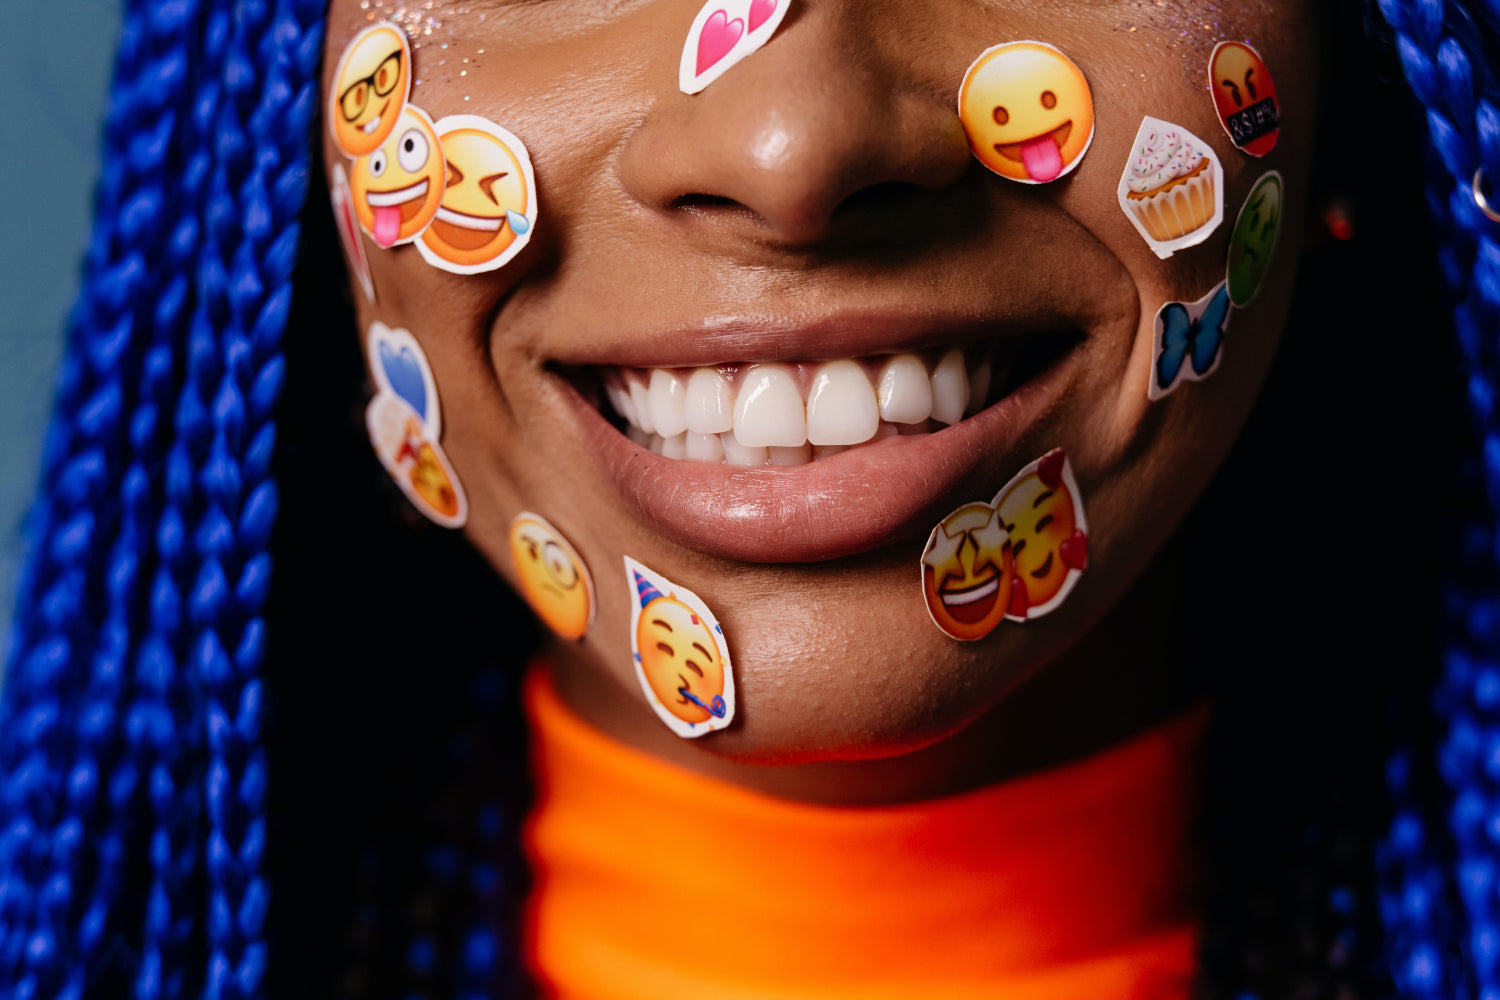 Woman's face covered in emoji stickers